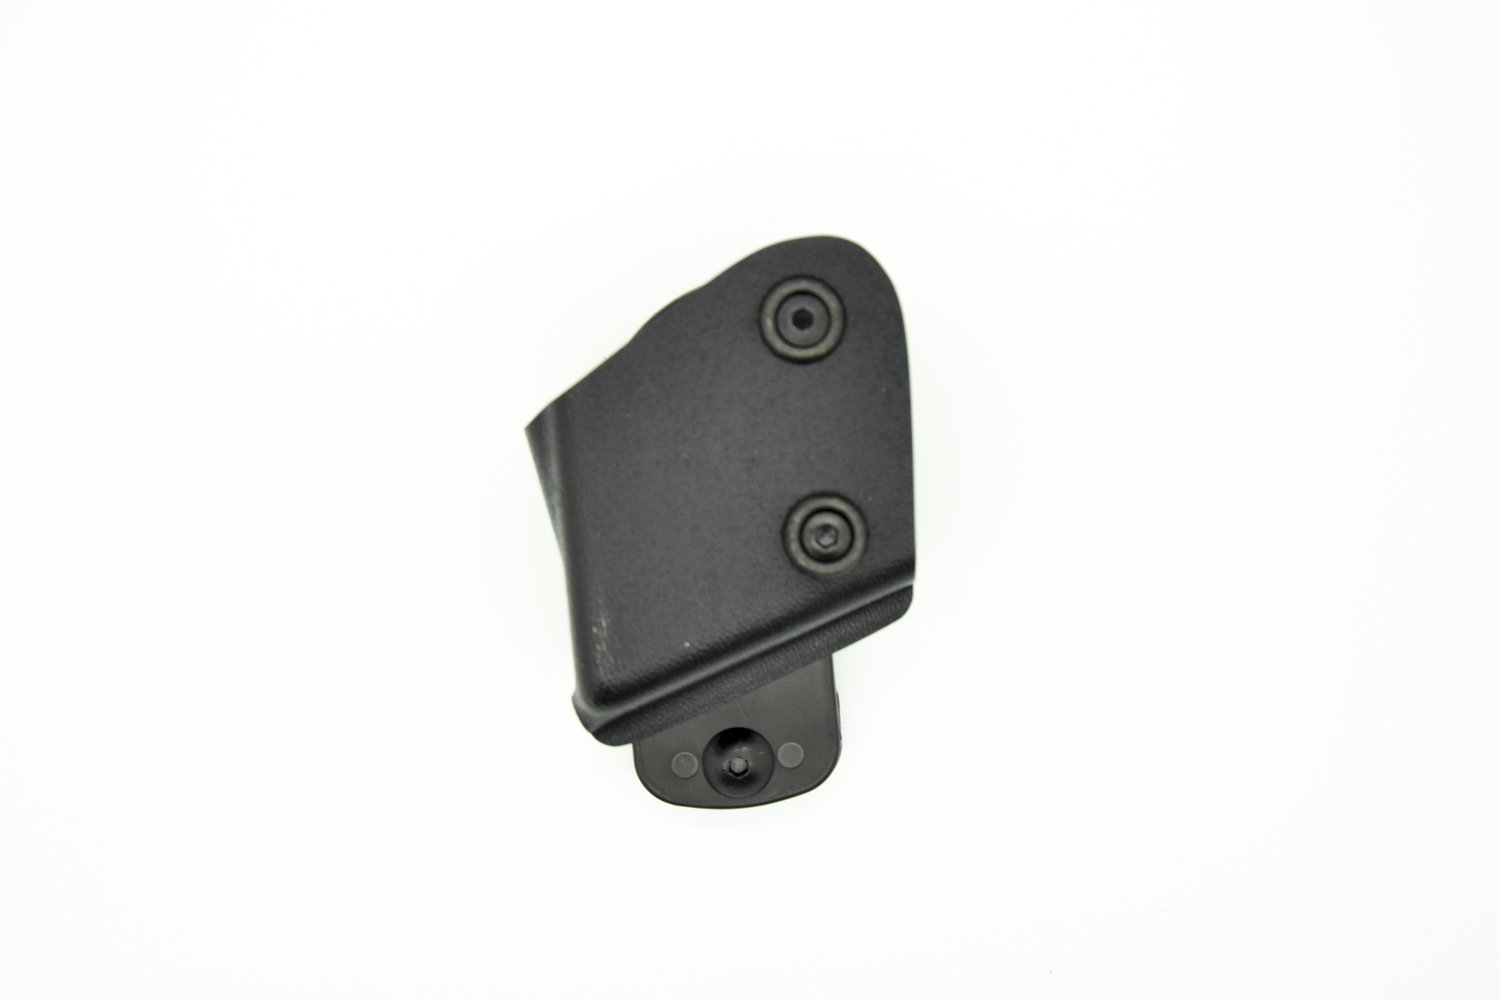 Mod 773 Competition Open Top Magazine Pouch STX (CZ/Sig/Arsenal Firearms)